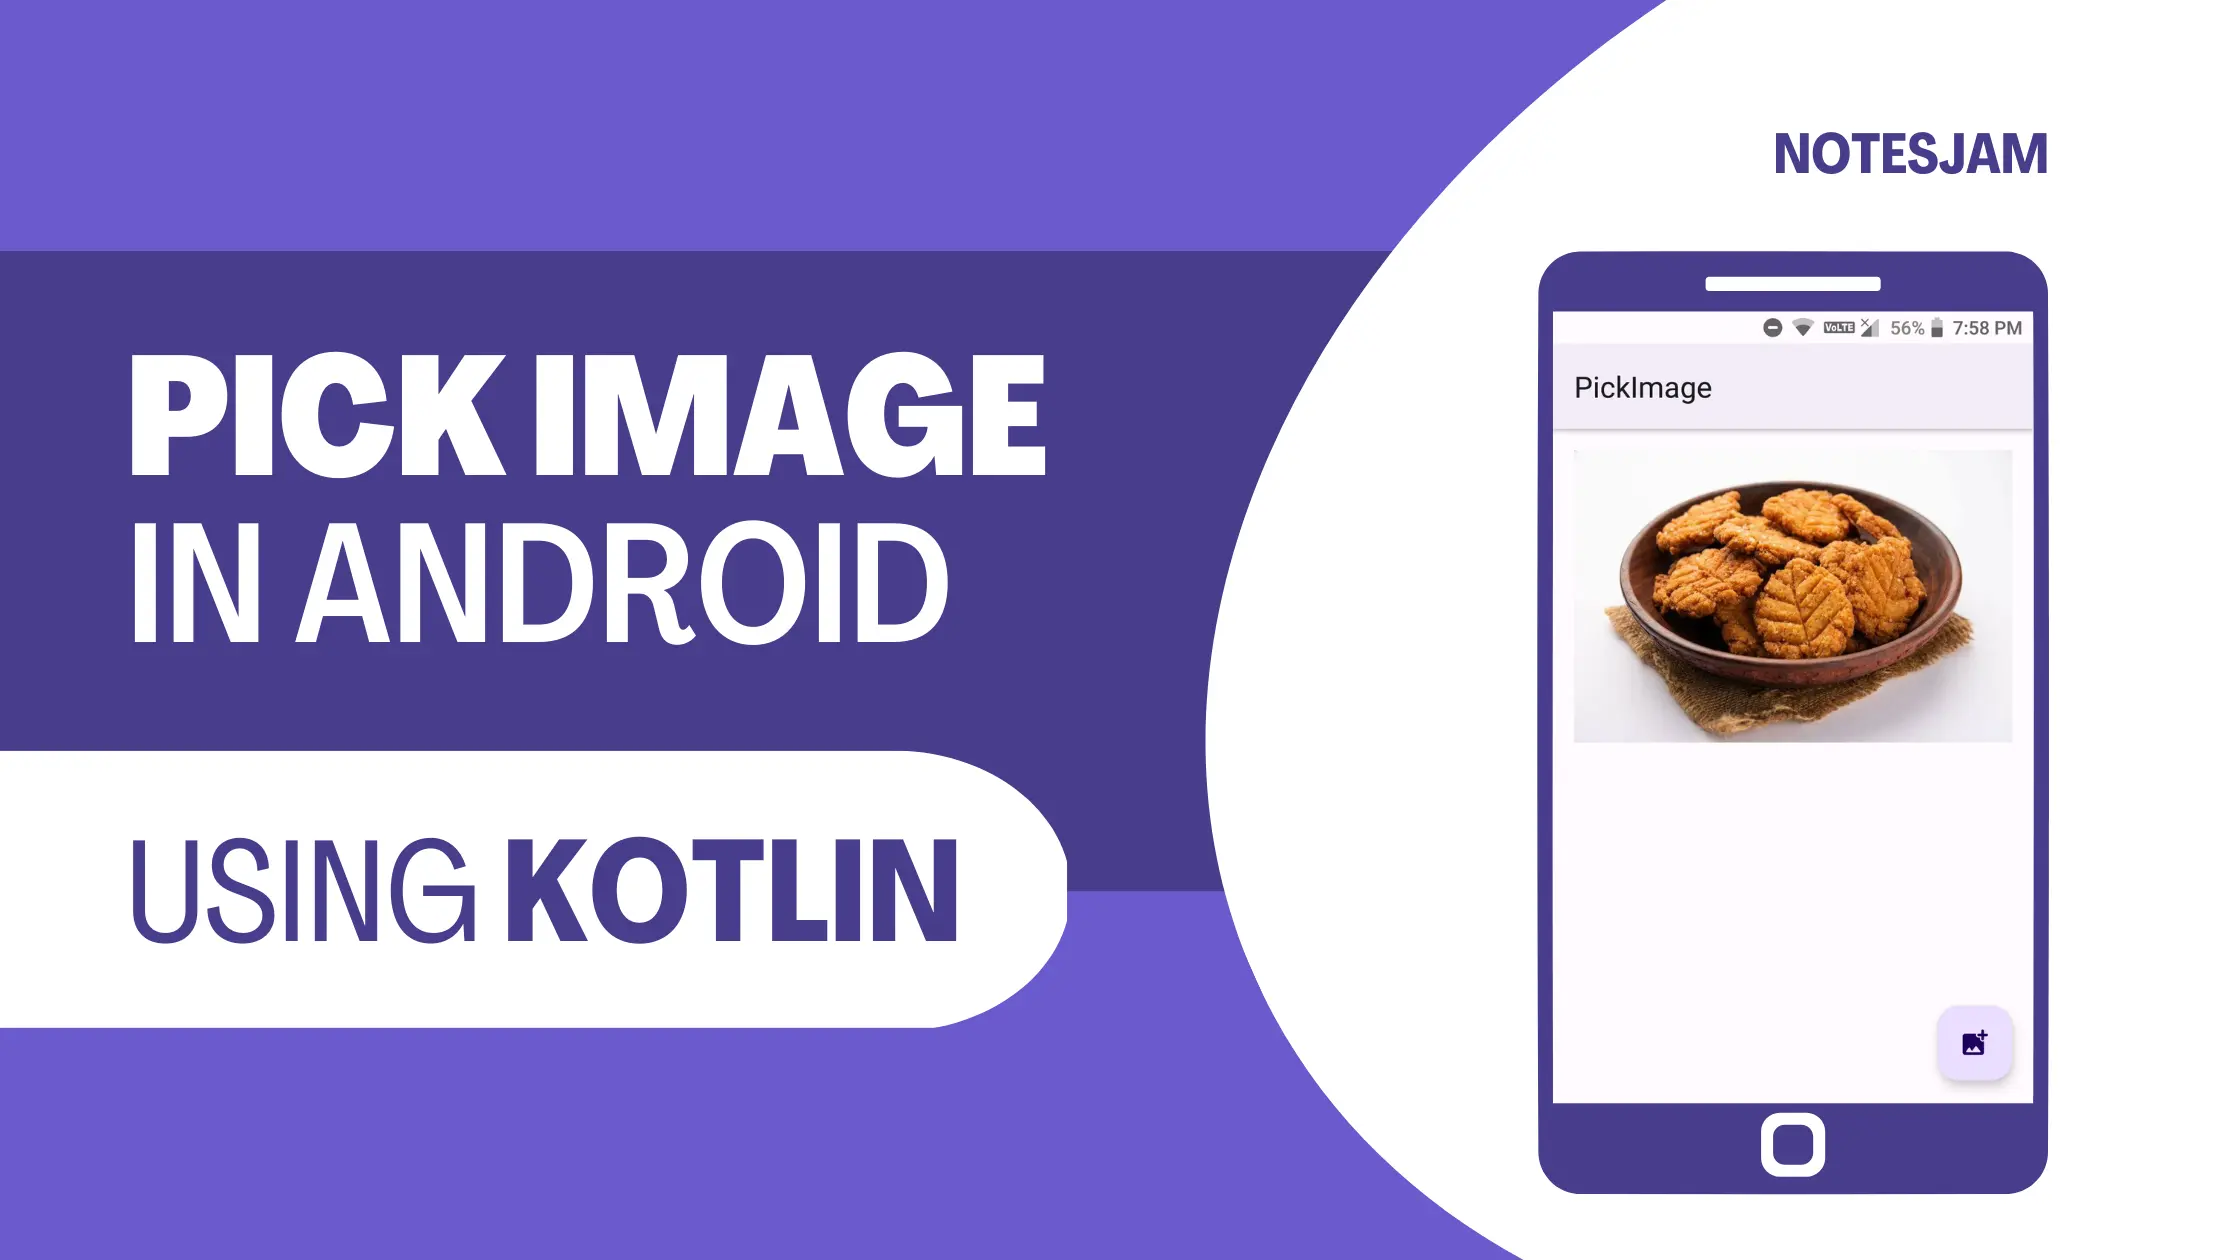 Pick image from gallery in android using Kotlin.